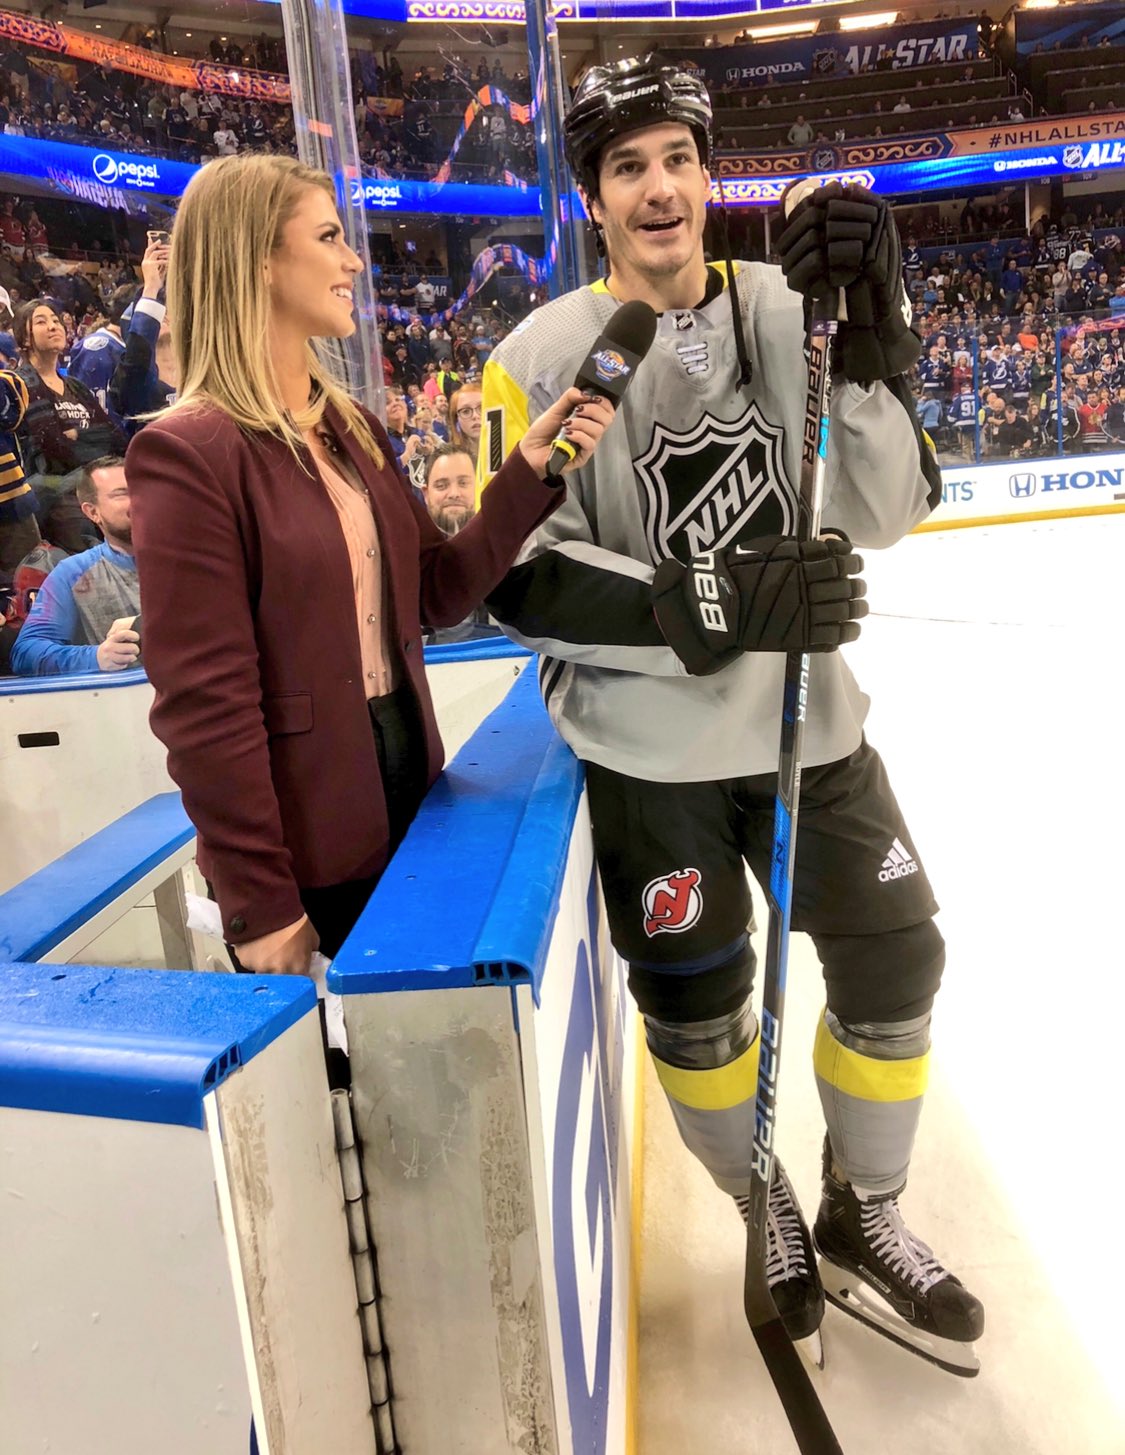 Caley Chelios on X: Unbelievable love and support from the crowd here at  the NHL All-Star game. Standing ovation and “Brian Boyle” chant for the  former Bolt. We're all fighting for you